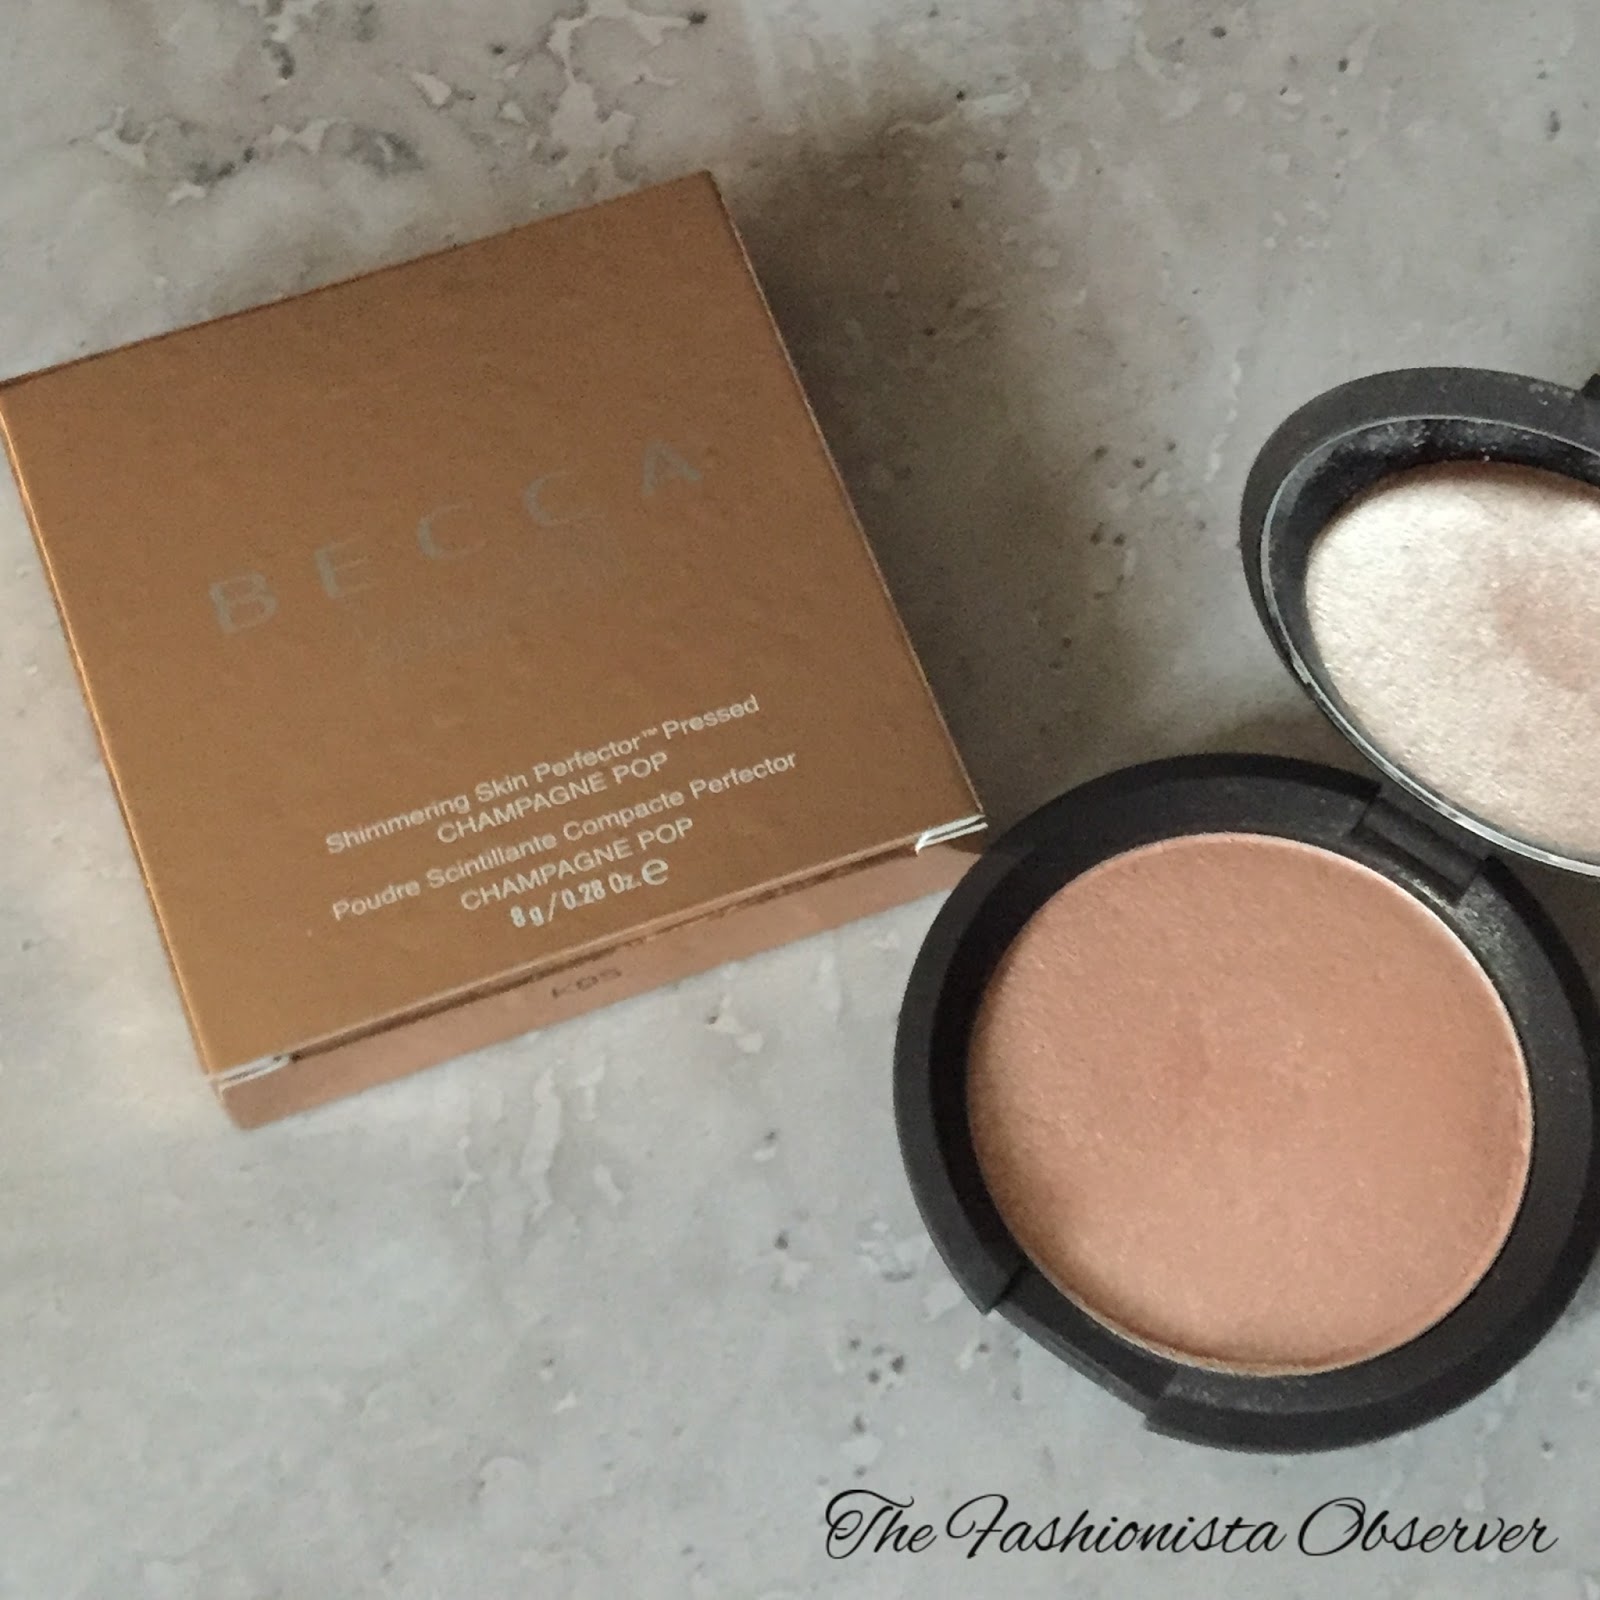 Becca Cosmetics & Jaclyn Hill Champagne Pop Highlighter Review